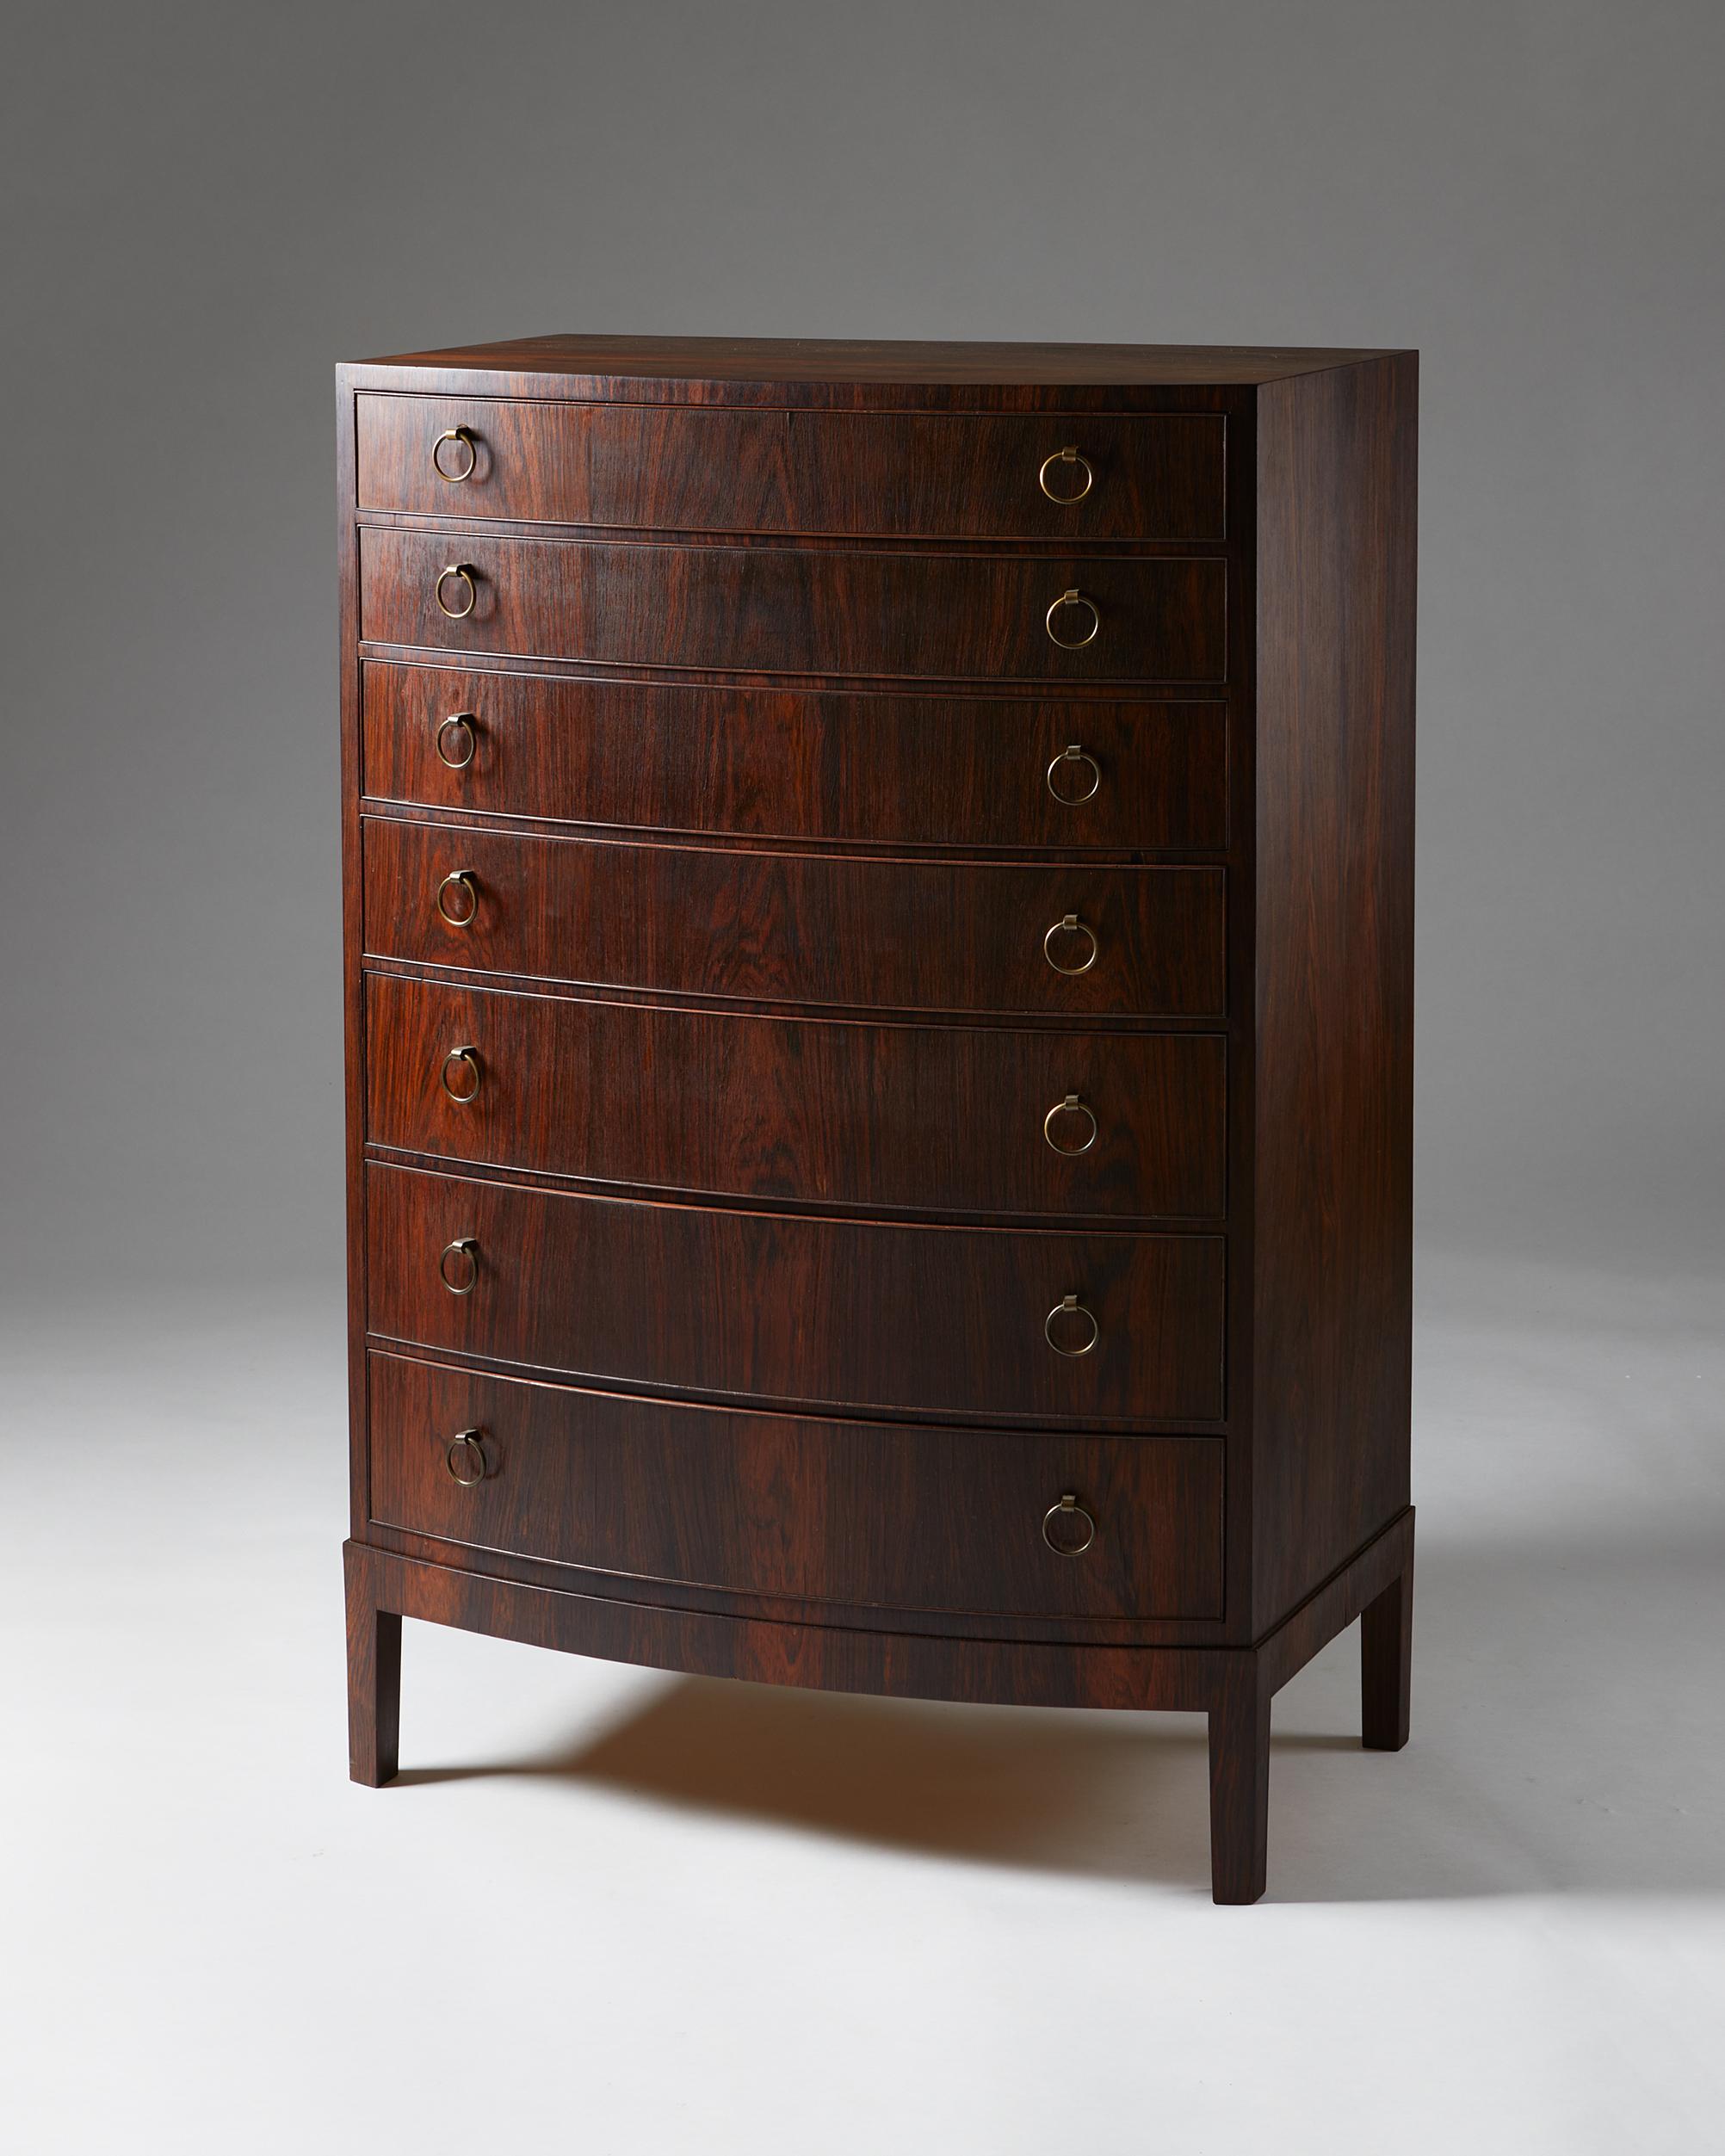 Chest of drawers, anonymous, Denmark. 1950s. 

Rosewood and brass.

Dimensions:
H: 121 cm/ 3' 11 1/2